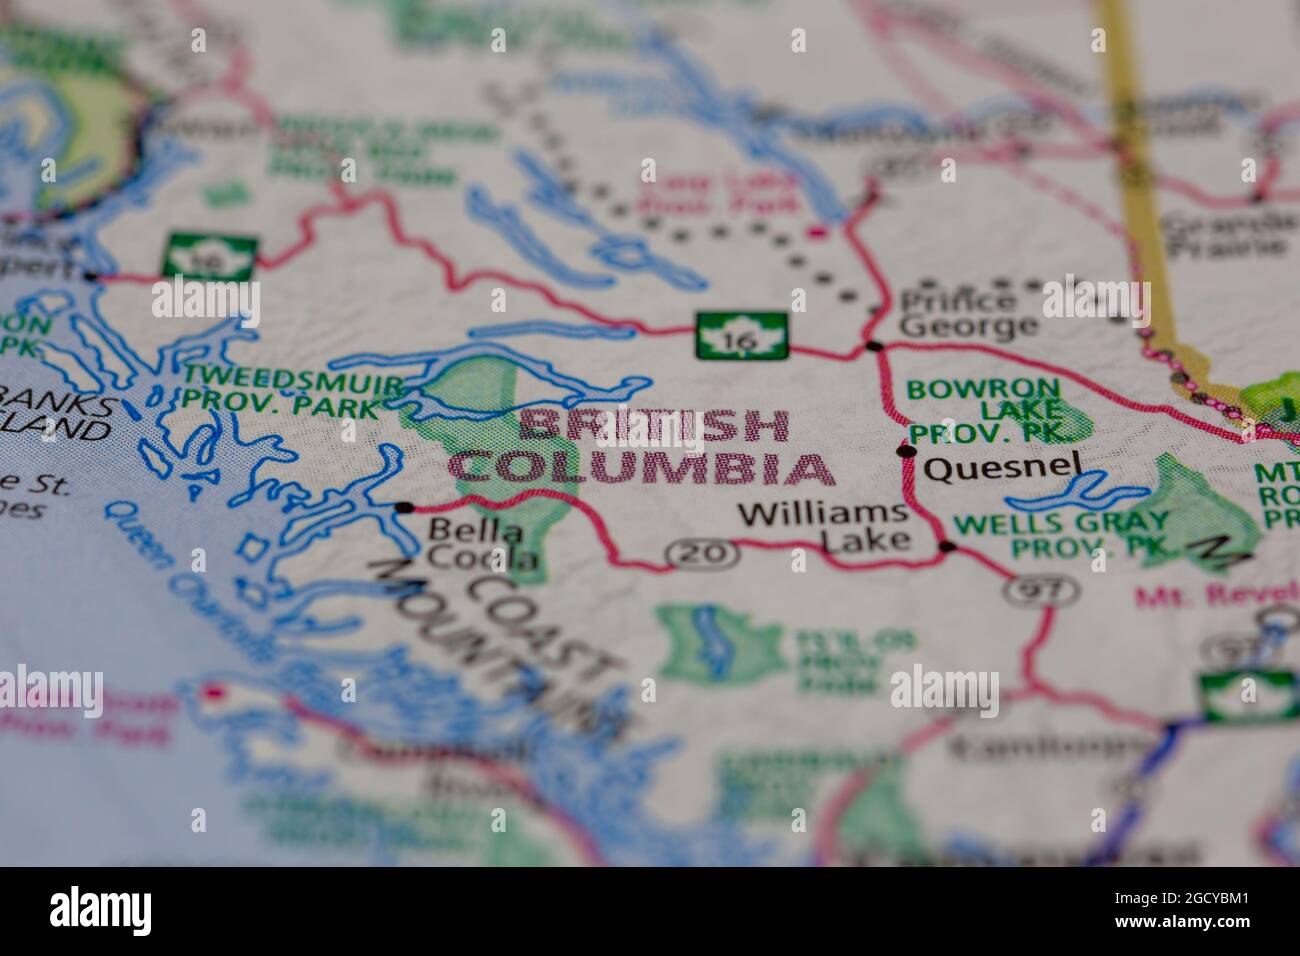 British Columbia Canada Shown On A Road Map Or Geography Map 2GCYBM1 